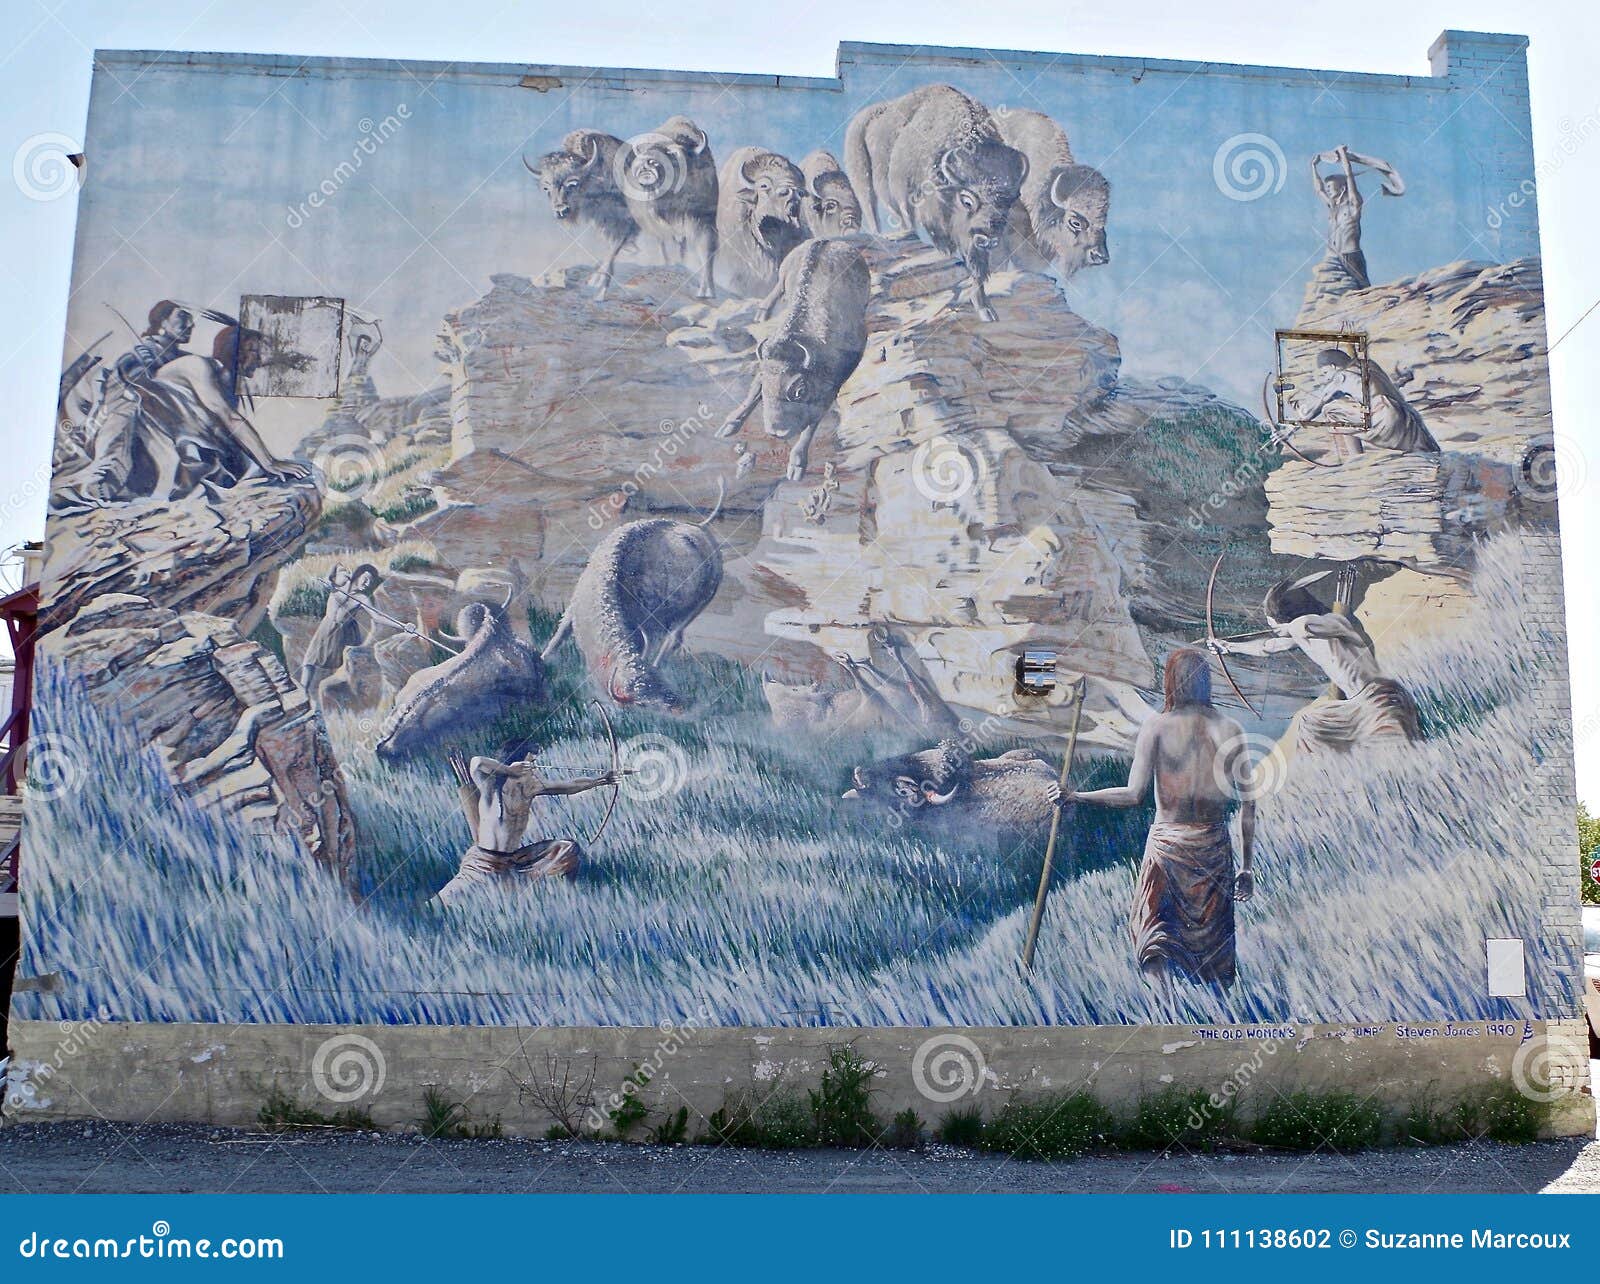 Head Smashed in Buffalo Jump Wall Mural, Southern Alberta, Canada Editorial Photography - Image of decoration, 111138602